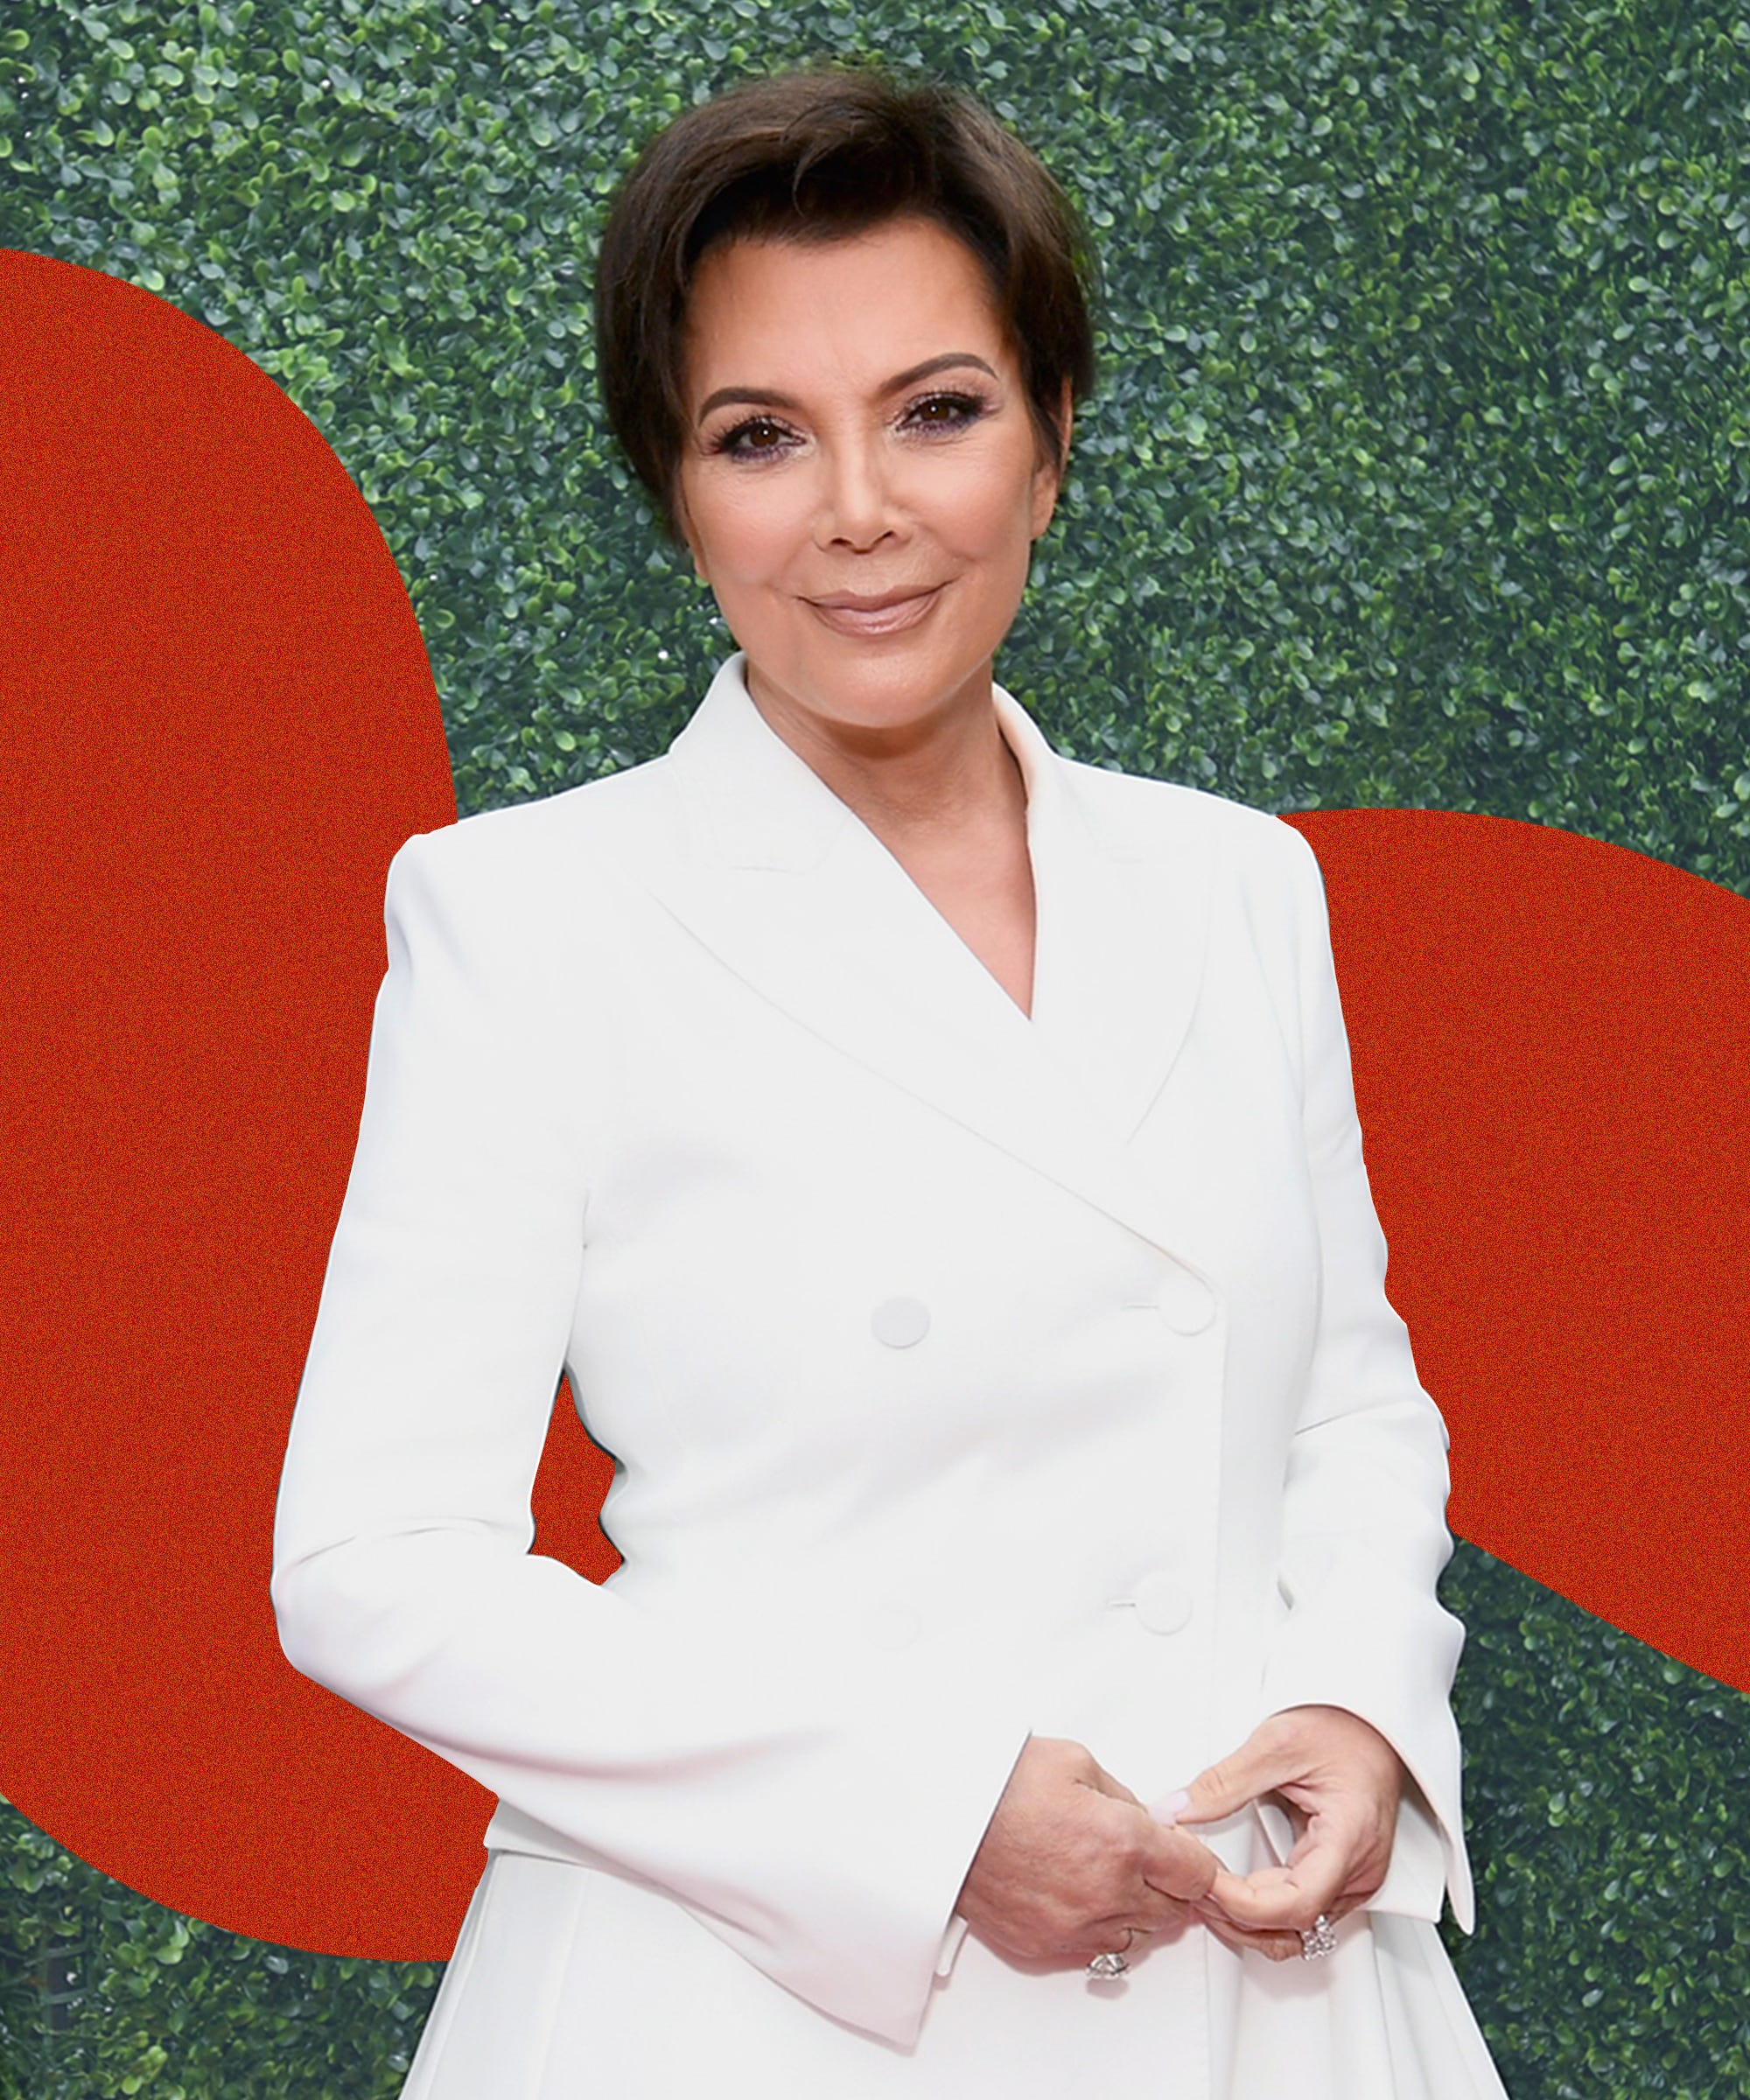 Kris Jenner Net Worth - The Super Momager Of Her Five Daughters